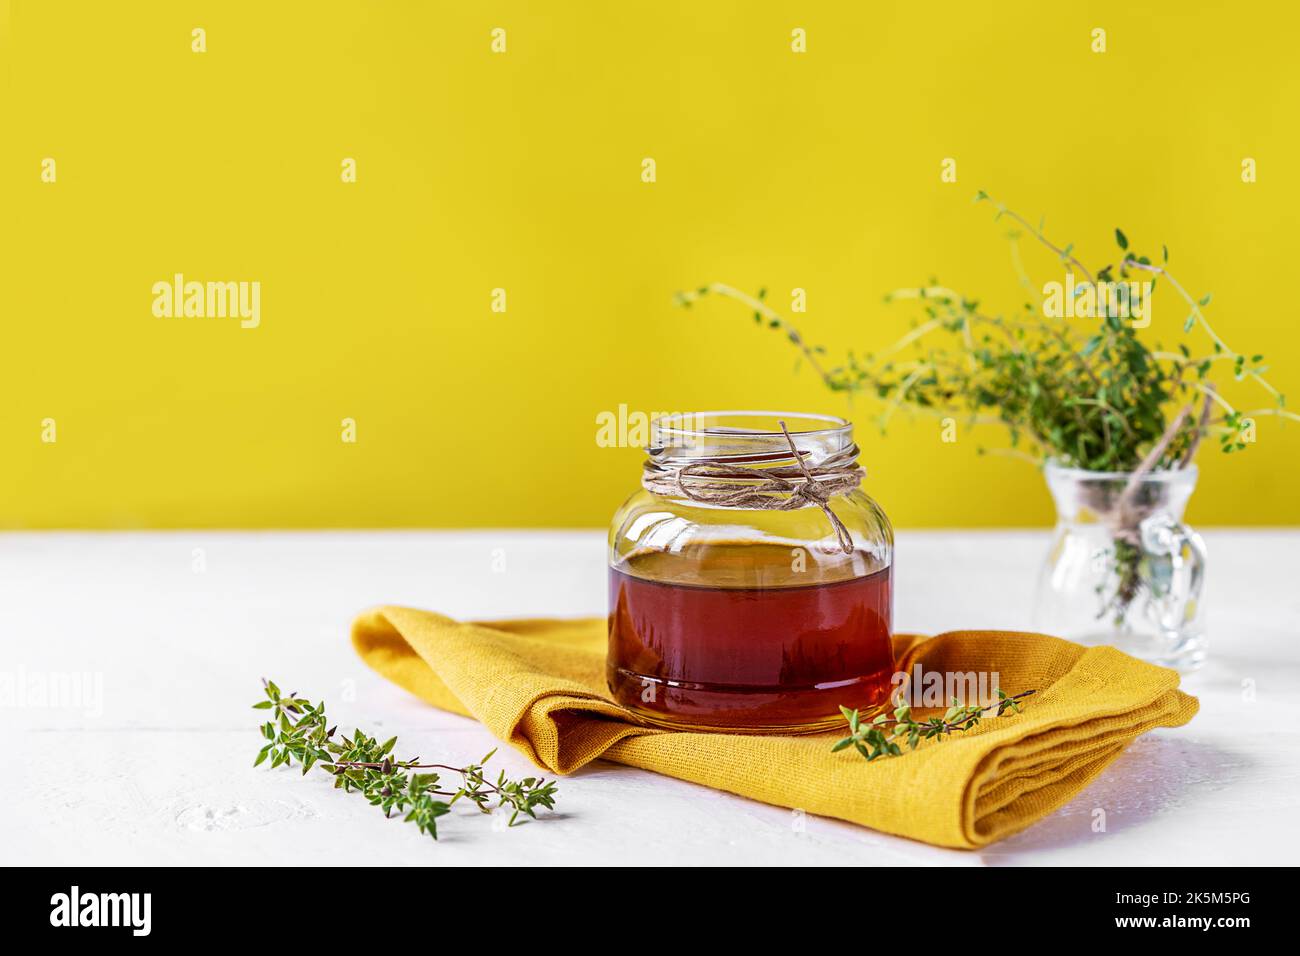 Thyme honey in small jar, fresh thyme, yellow napkin on white table with yellow background Stock Photo